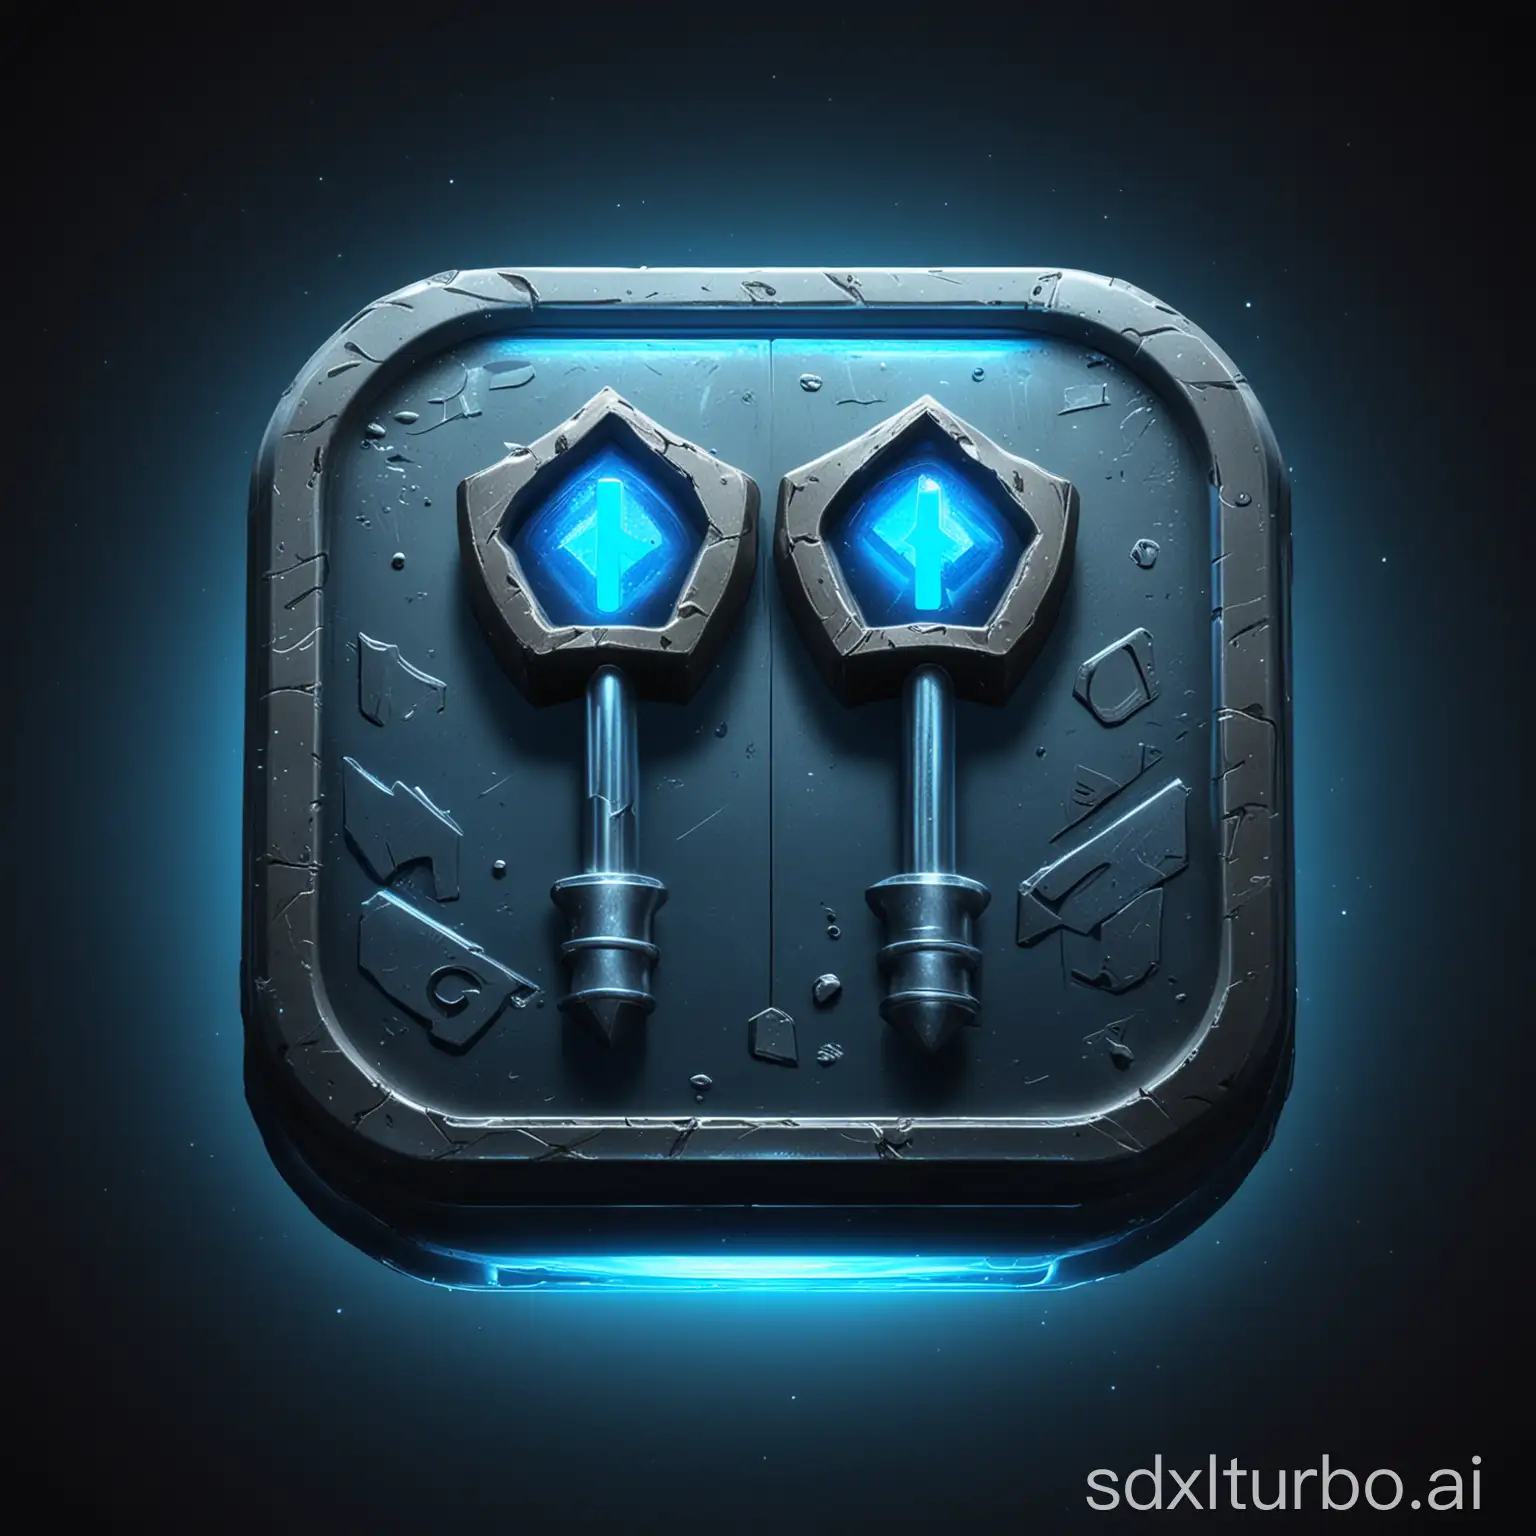  a detailed icon button with 2 shovels symbol, inclined to left, GUI element for a space game, metalic look with blue glowing lights